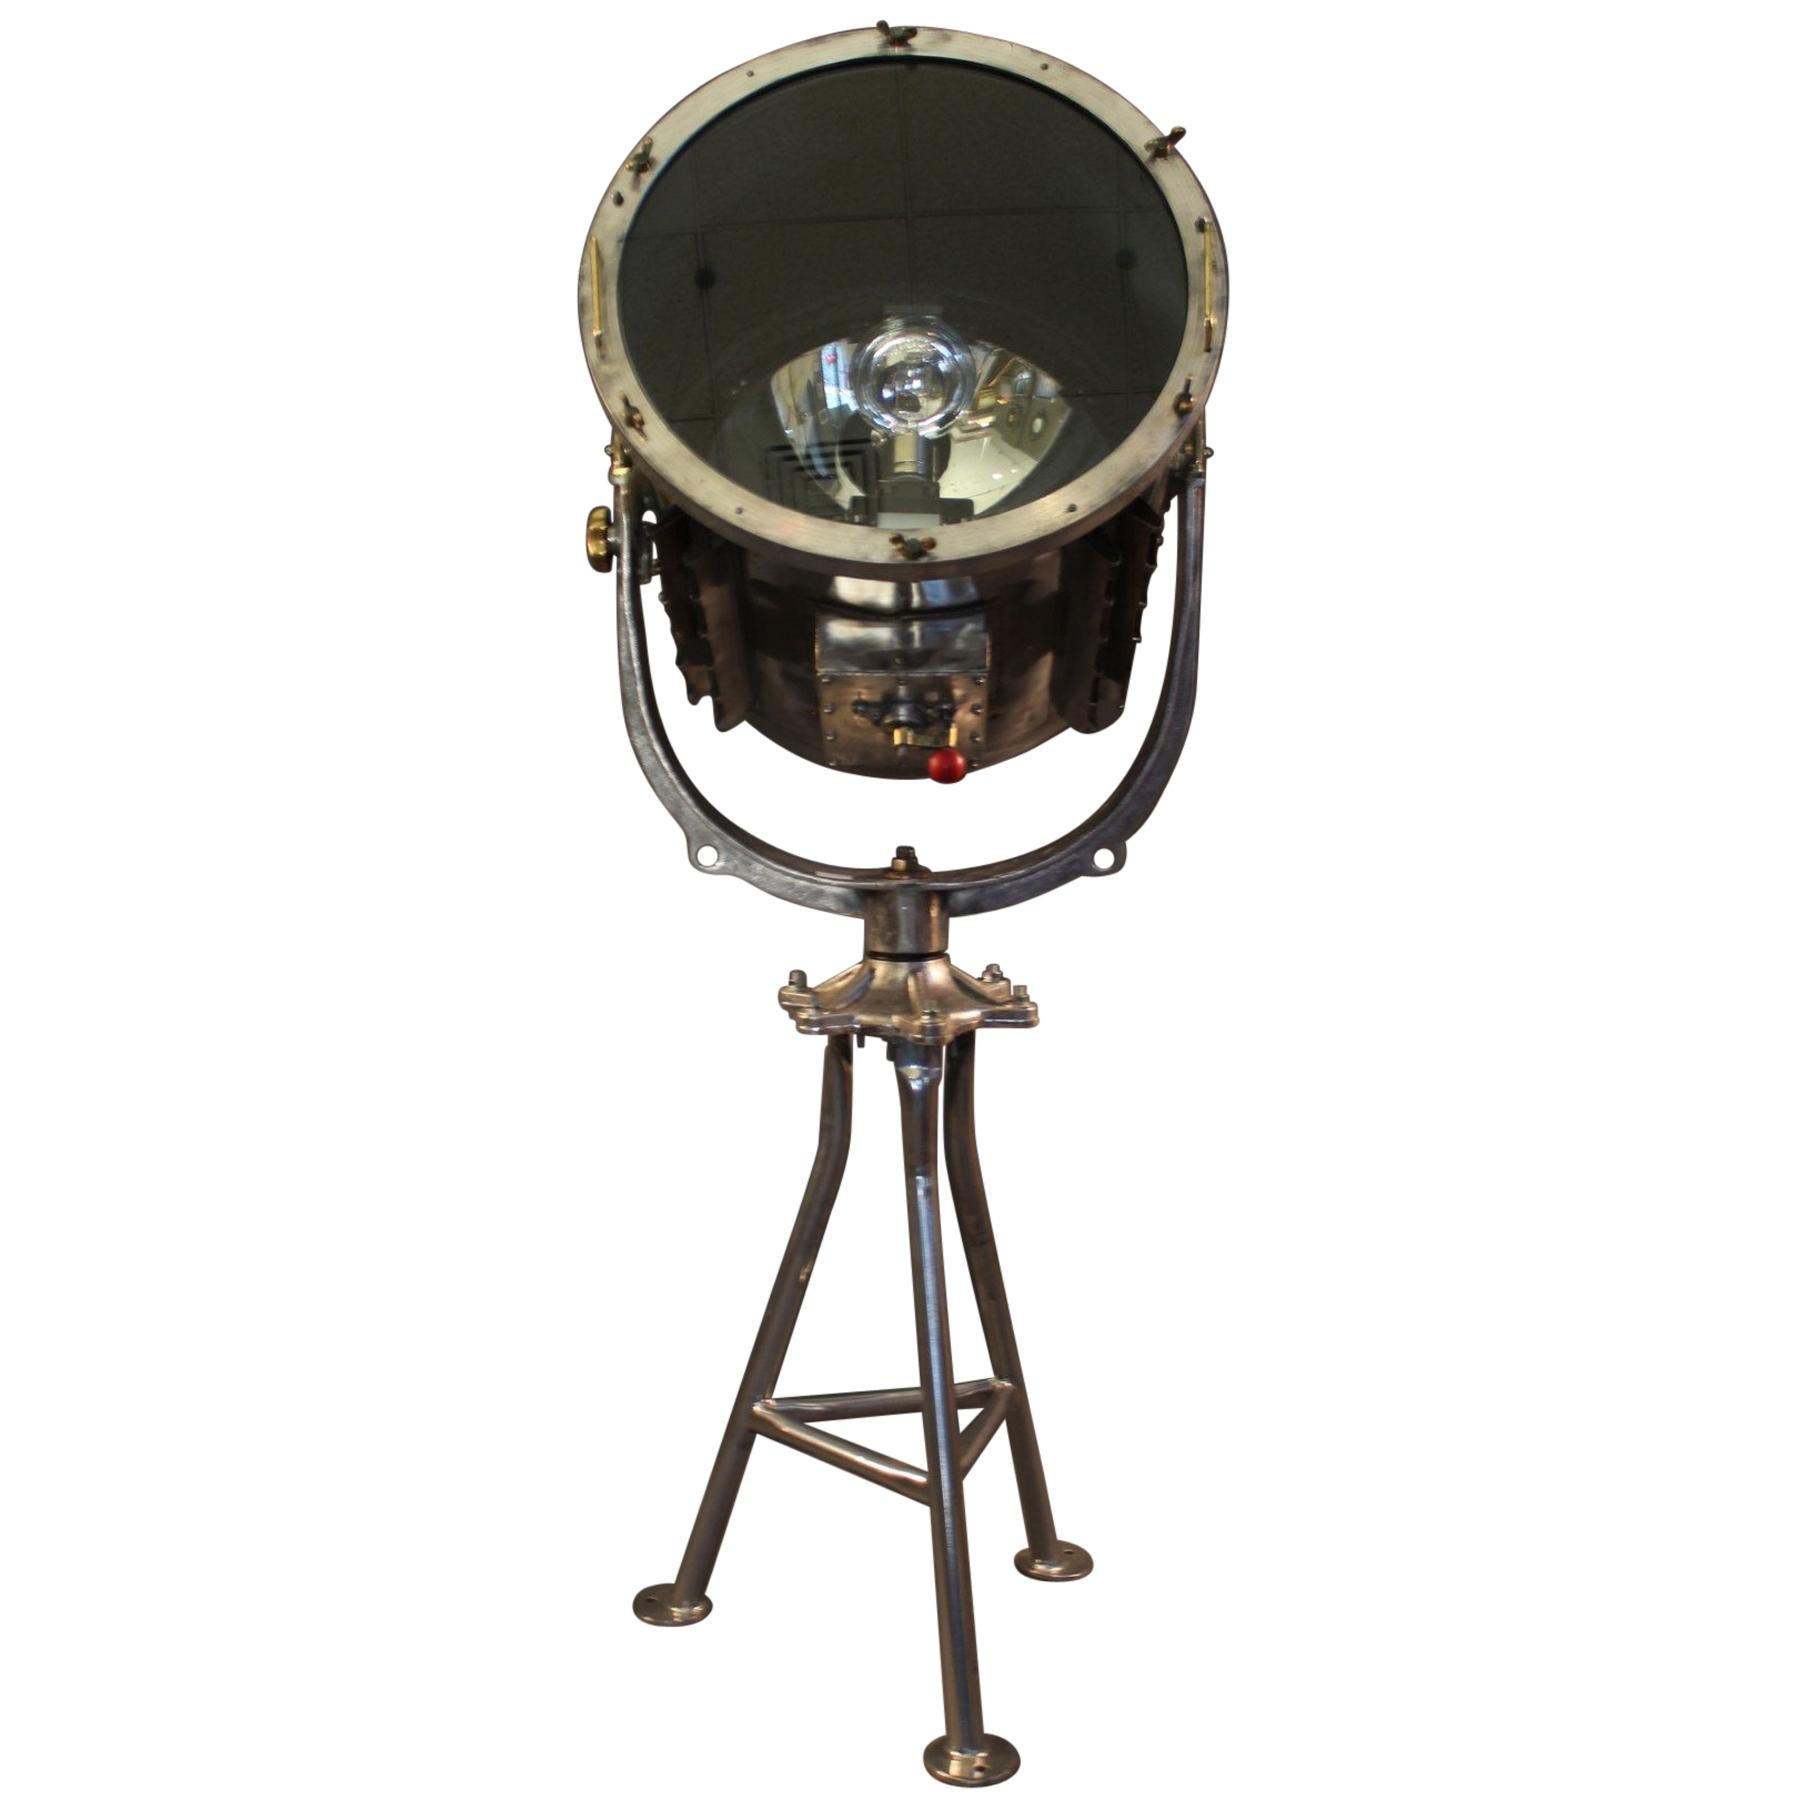 Suez Canal Searchlight For Sale